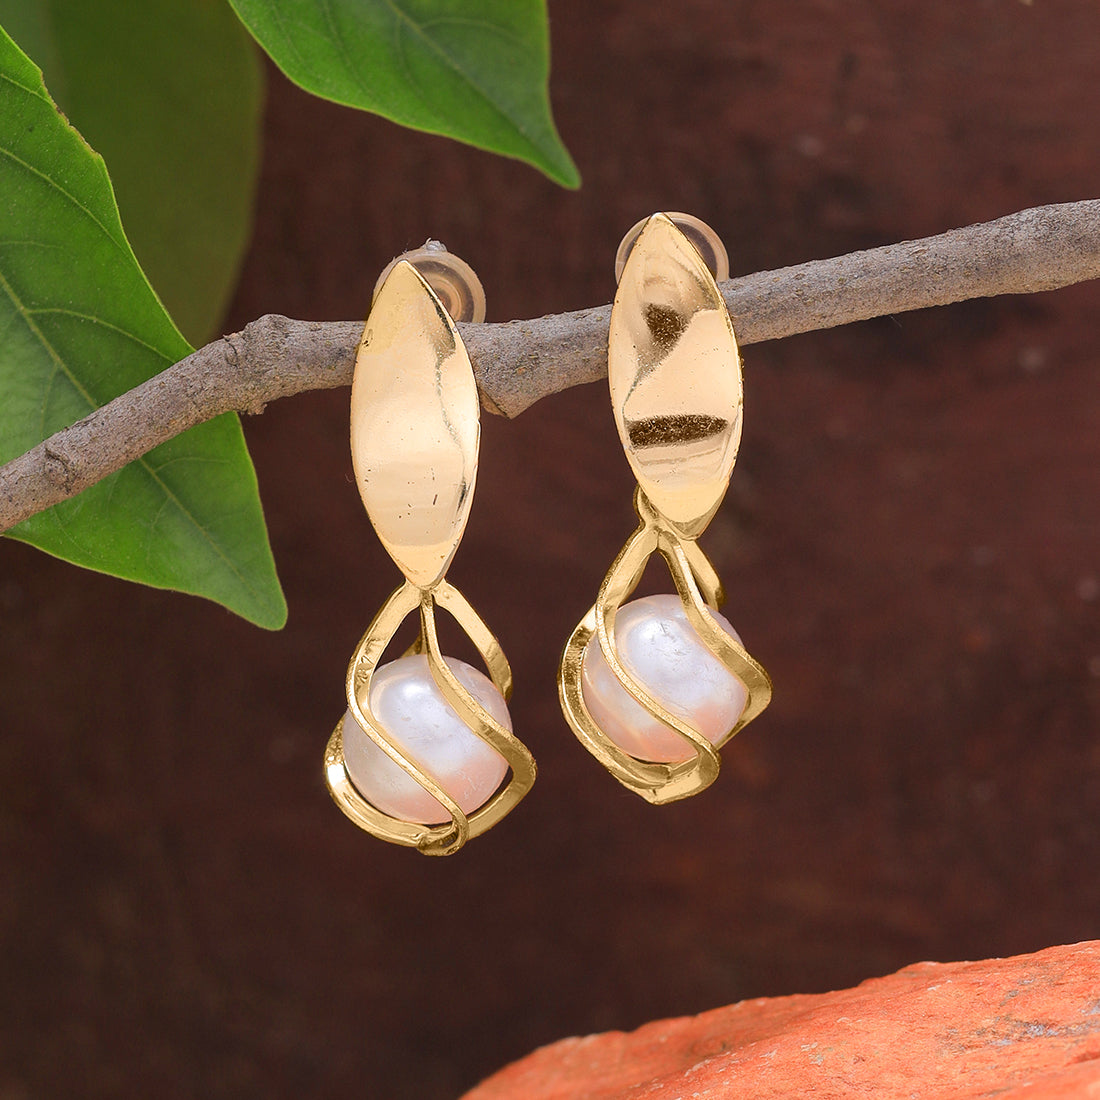 Sophisticated Gold-Toned Earrings With A Single, Elegant Pearl Drop.